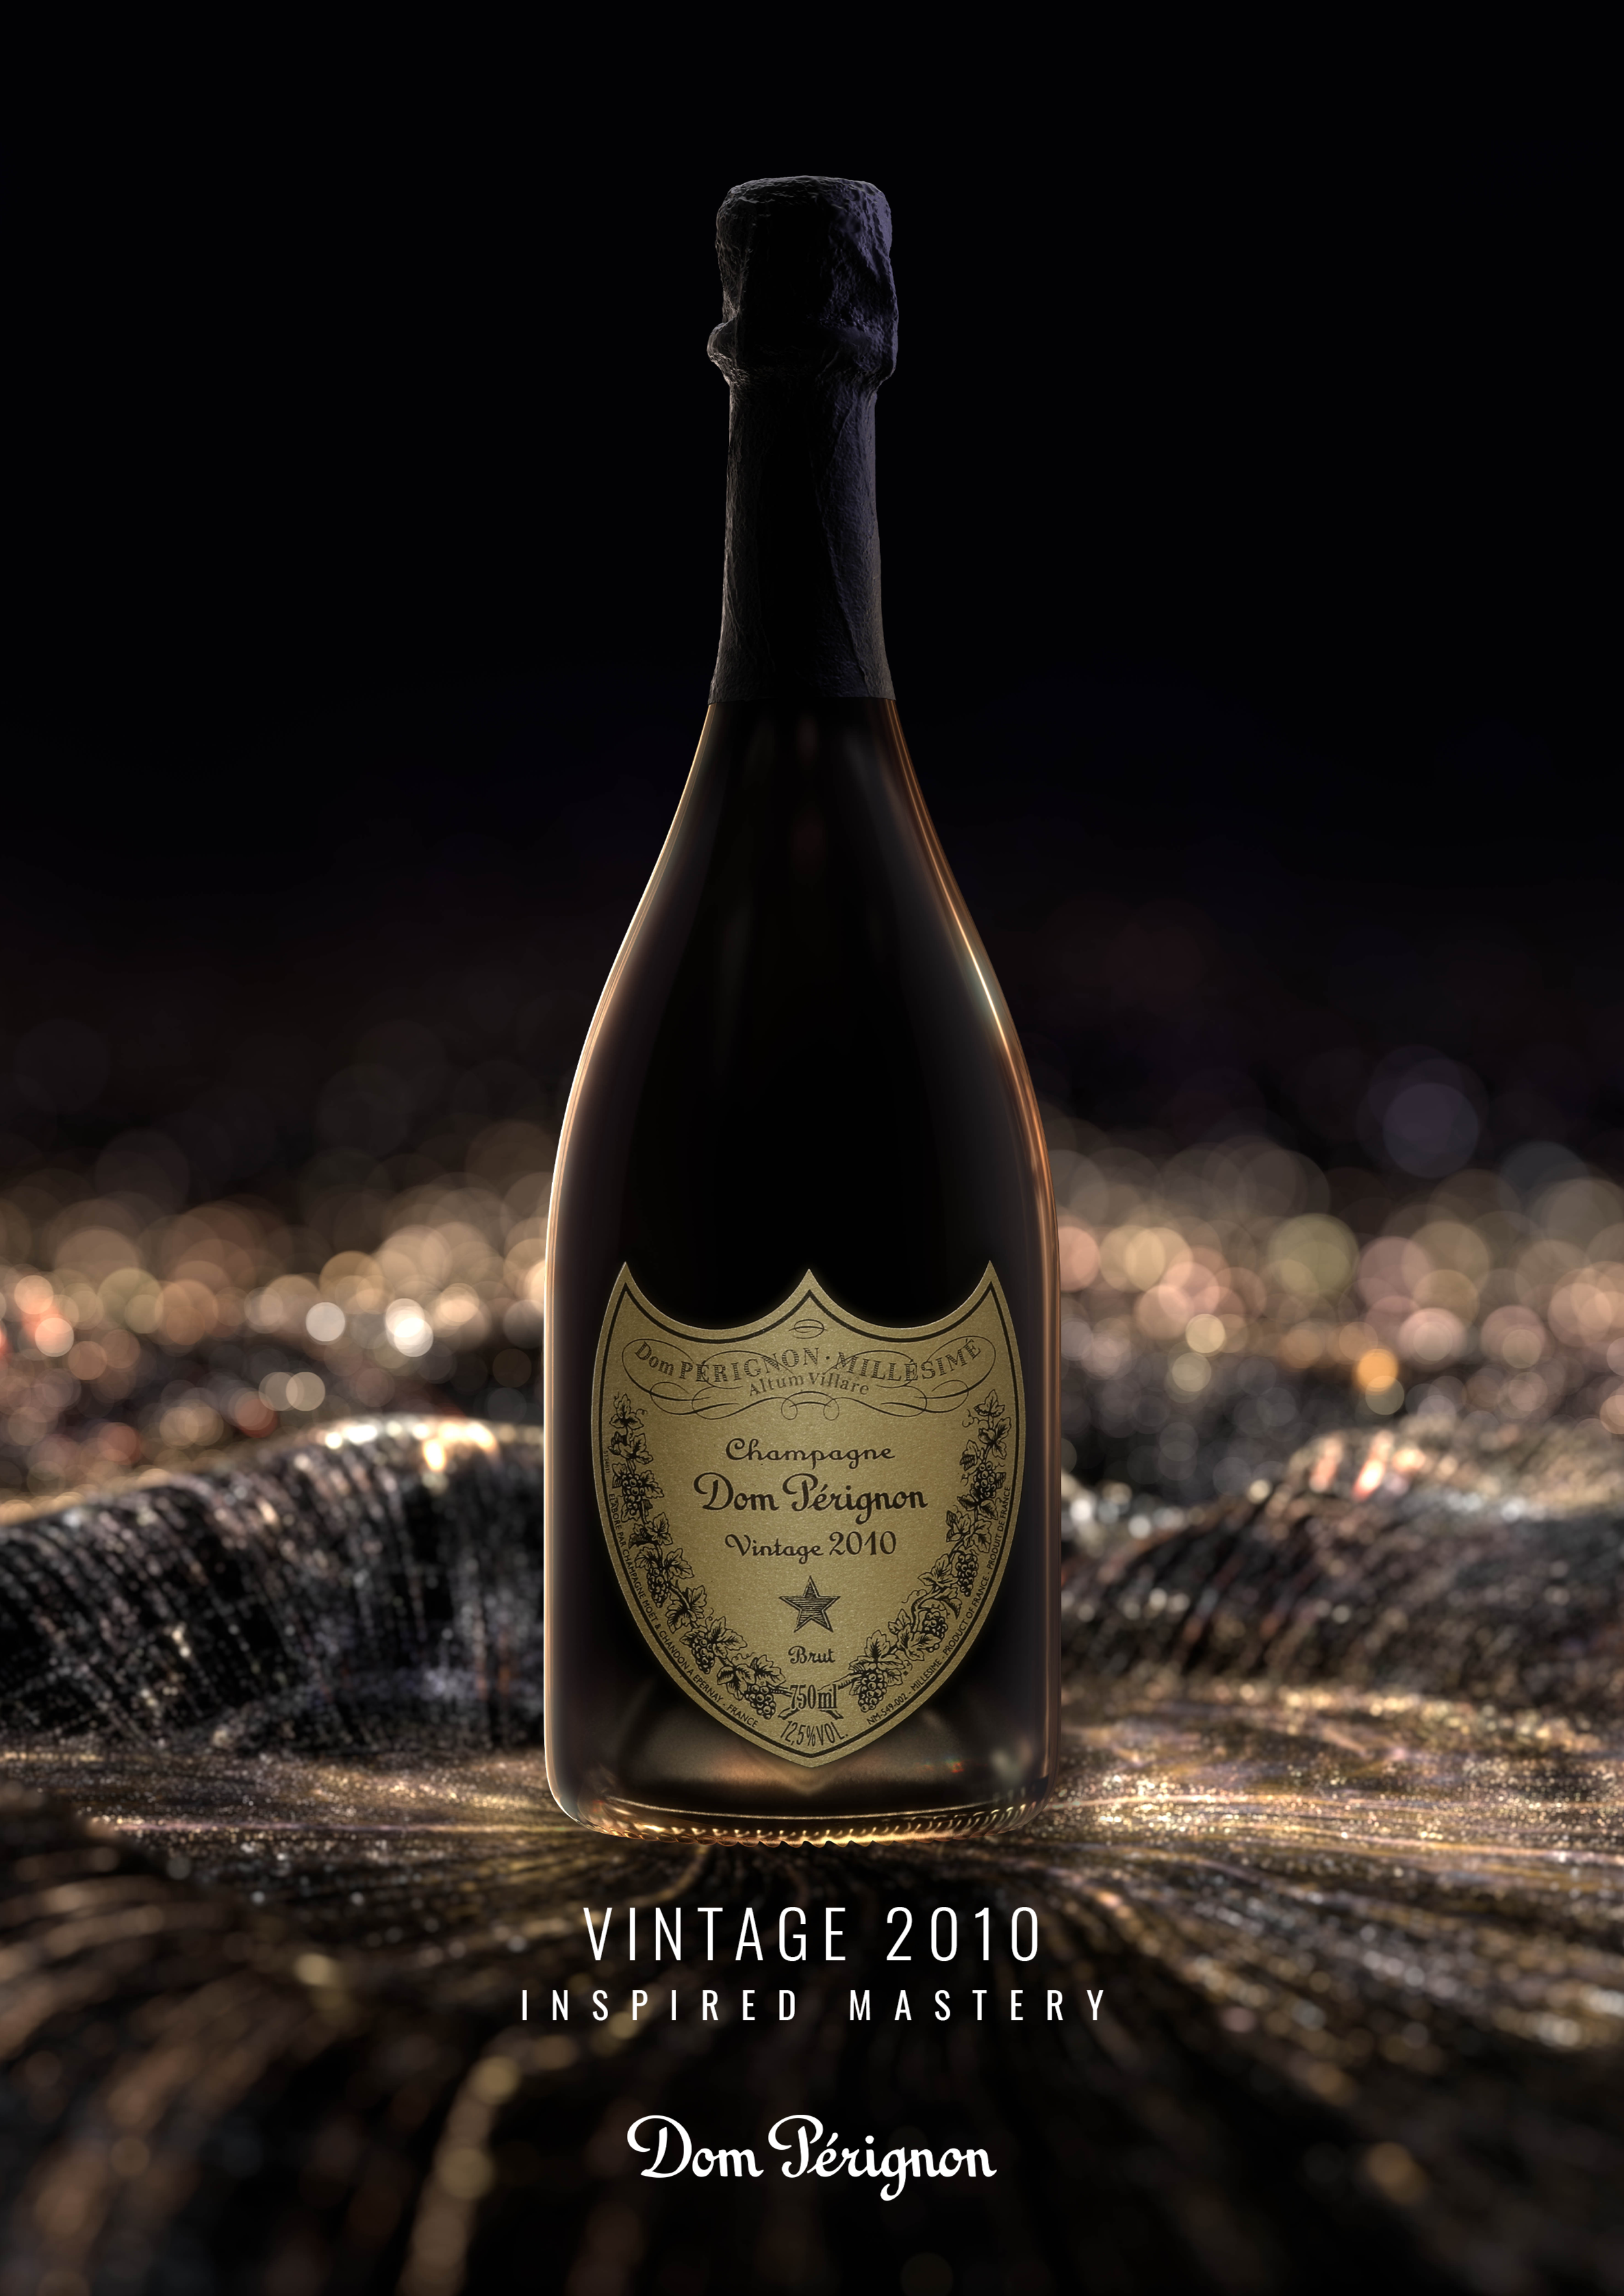 Dom perignon champagne cut out hi-res stock photography and images - Alamy